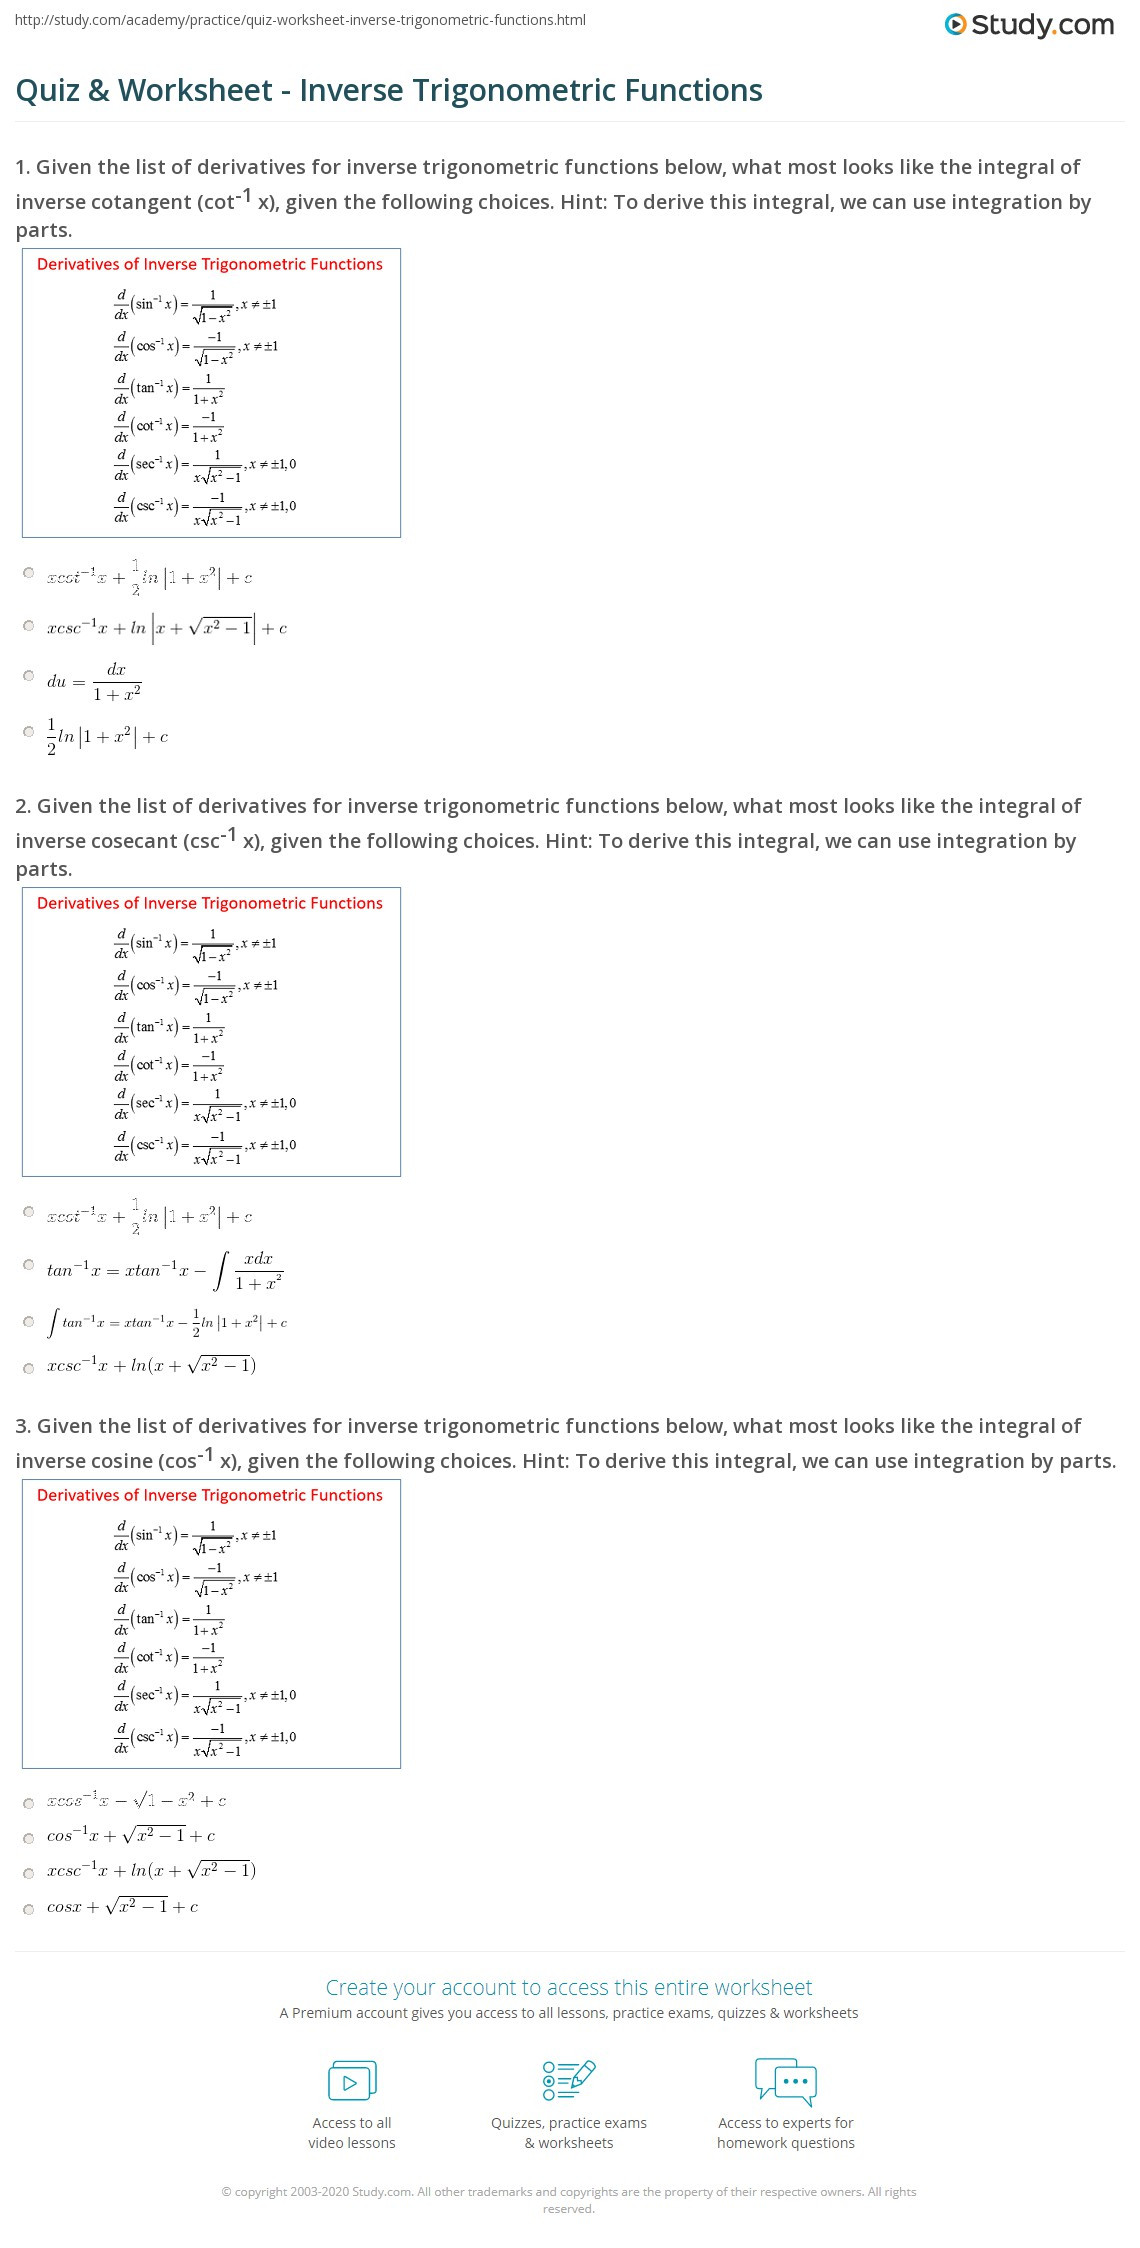 Inverse Functions Worksheet with Answers Quiz &amp; Worksheet Inverse Trigonometric Functions